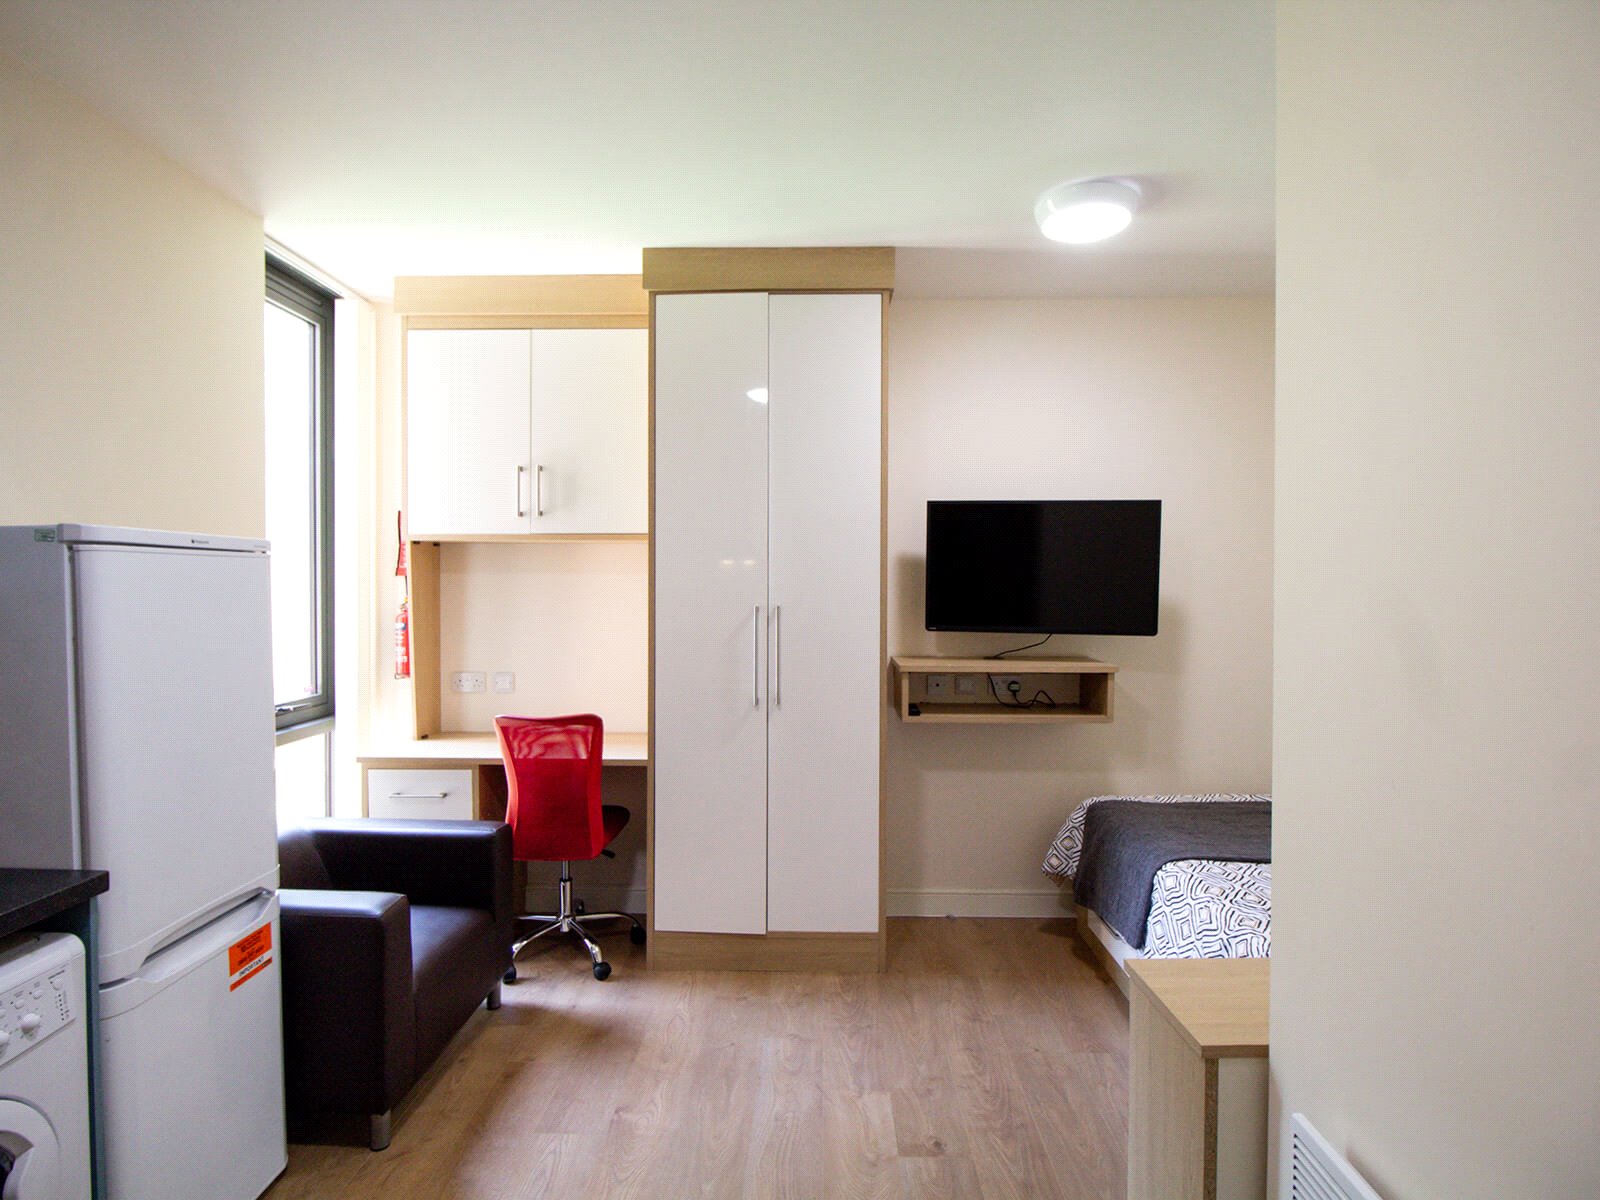 0 bed apartment for rent in Leeds. From YPP - Leeds